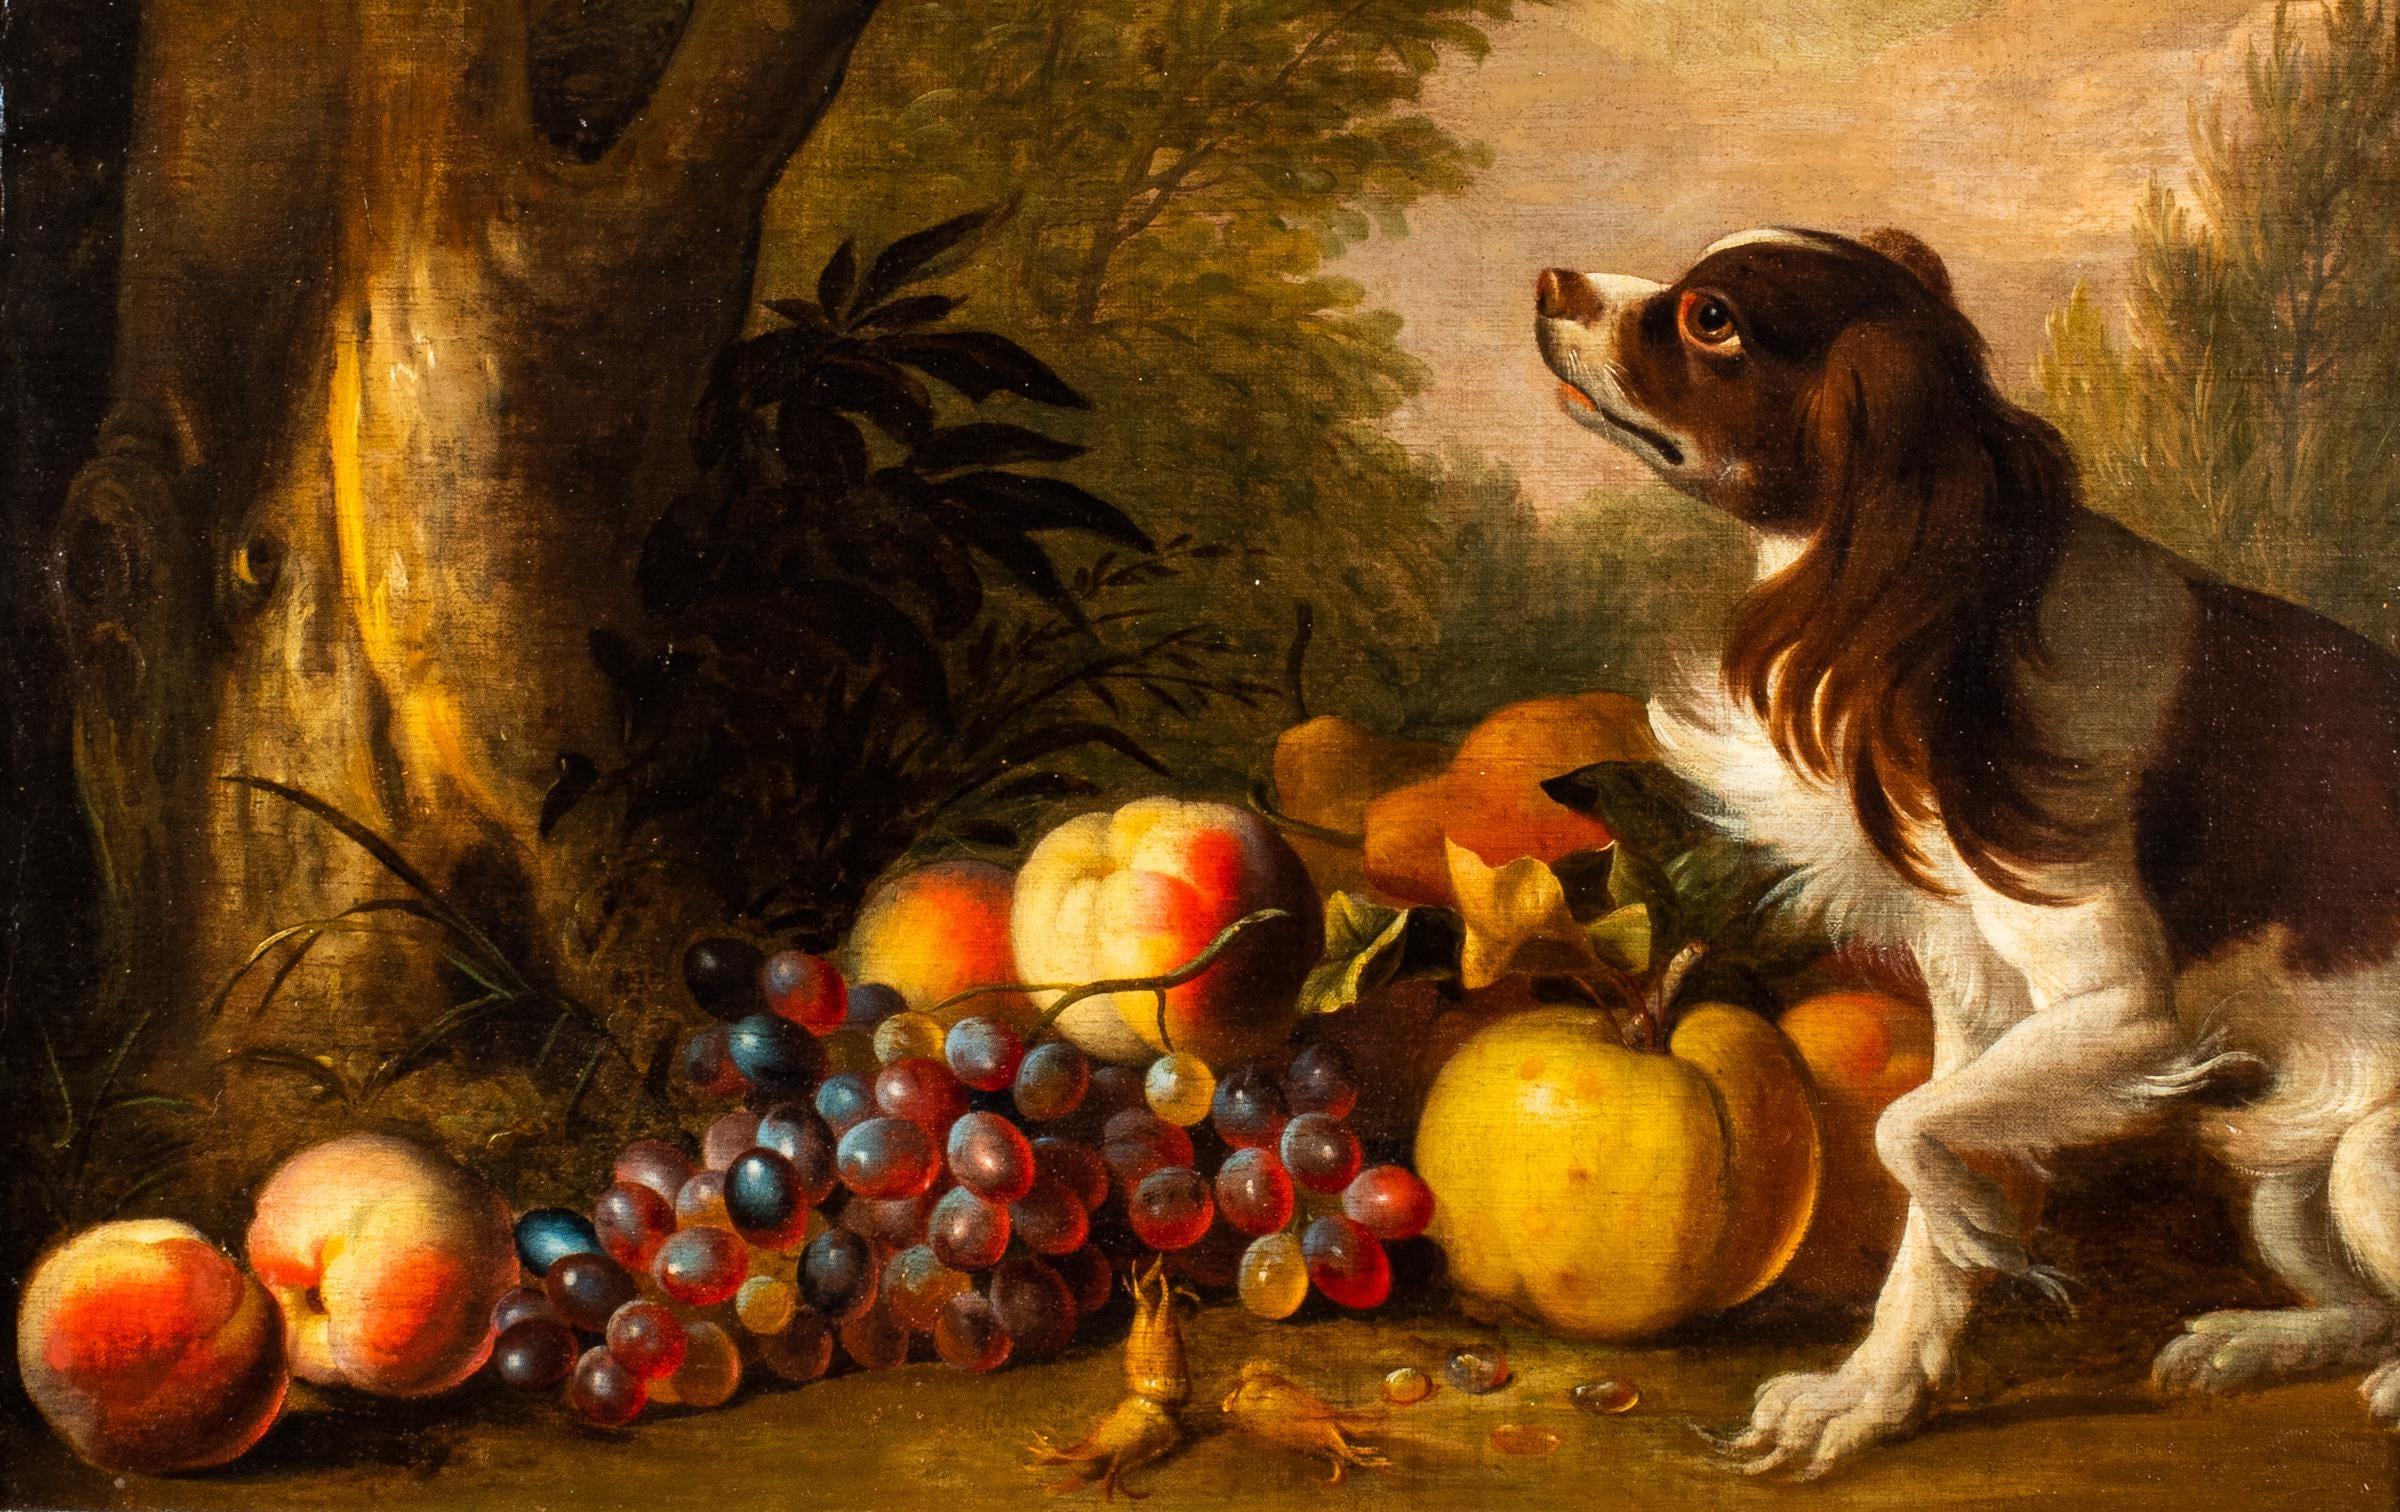 18th century portrait of a Spaniel dog with fruit in a wooded landscape. - Painting by Tobias Stranover